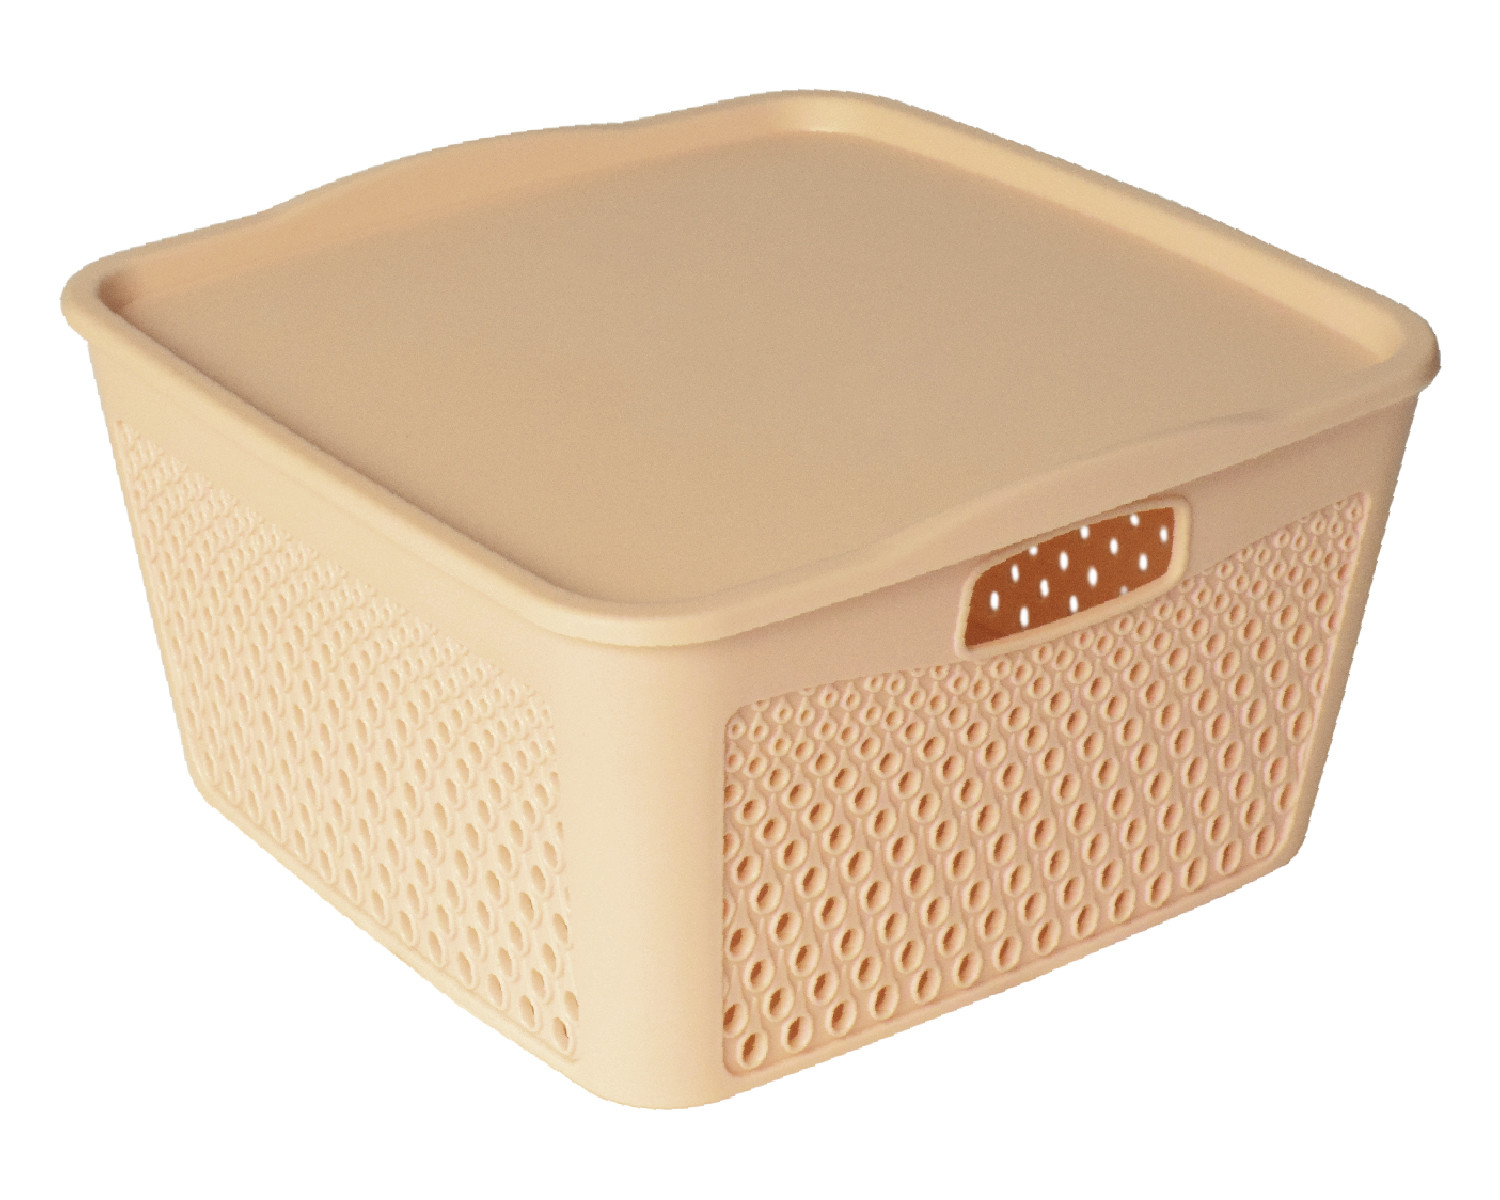 Kuber Industries Netted Design Unbreakable Multipurpose Square Shape Plastic Storage Baskets with lid Large (Beige)